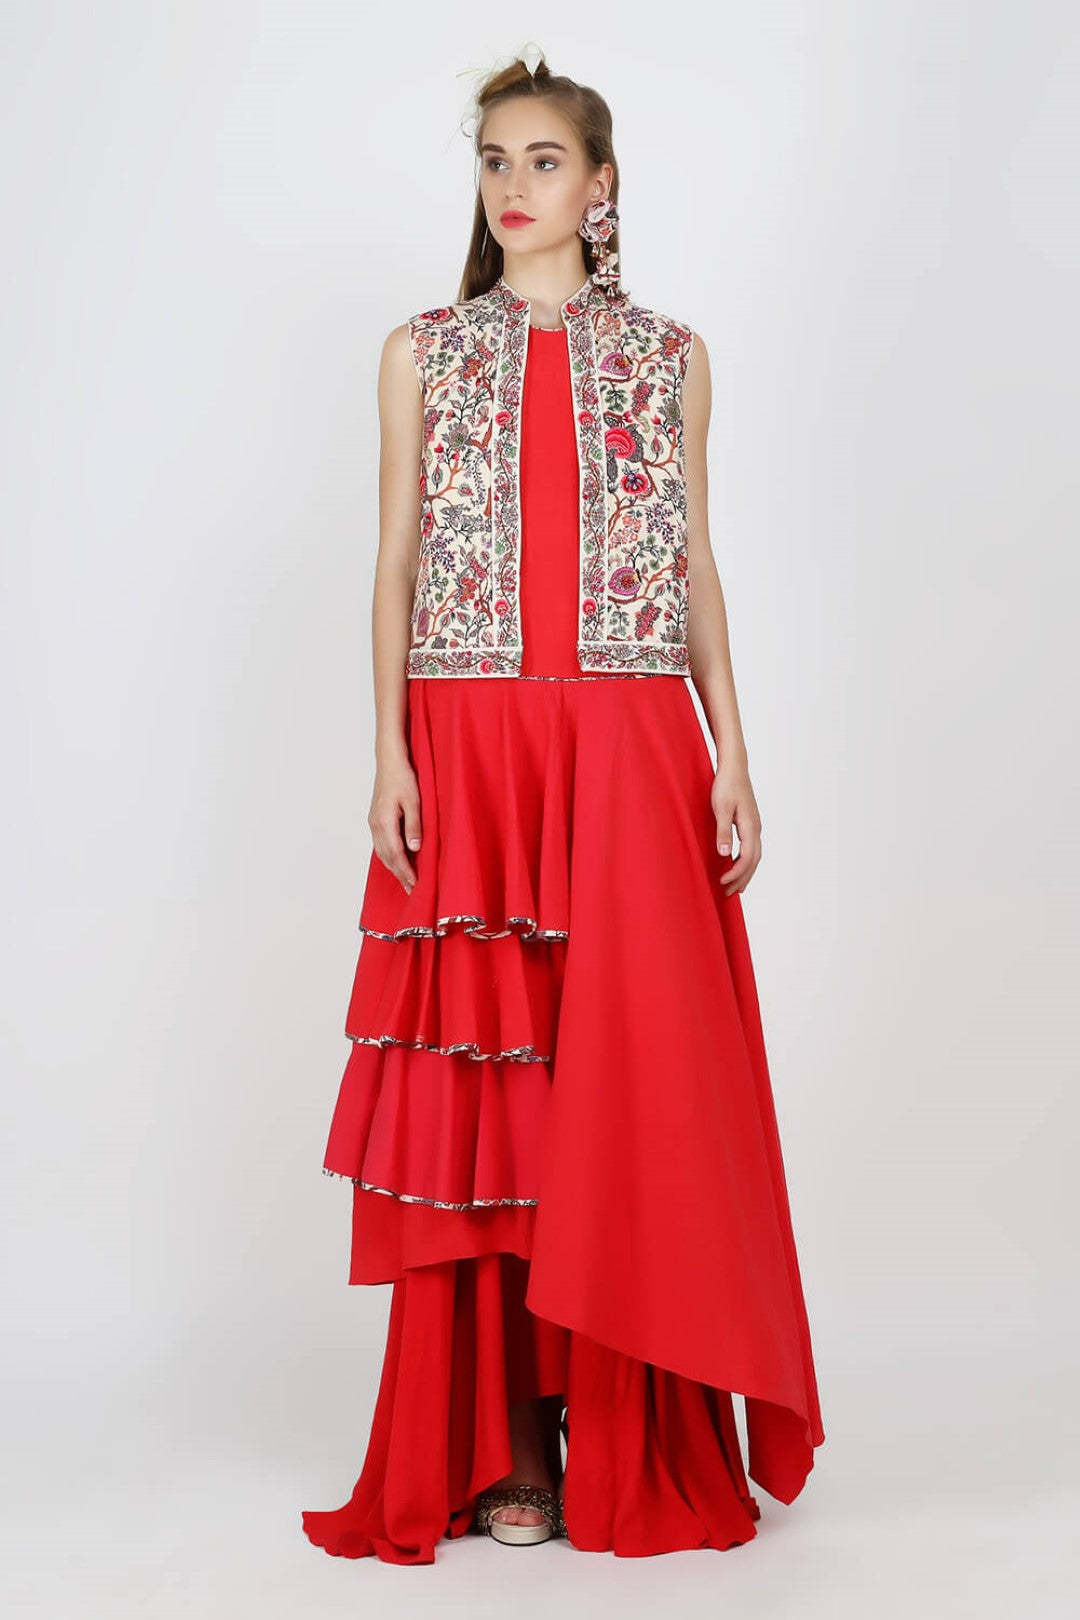 sleeveless jacket paired with red tier tunic with ryon moss skirt.